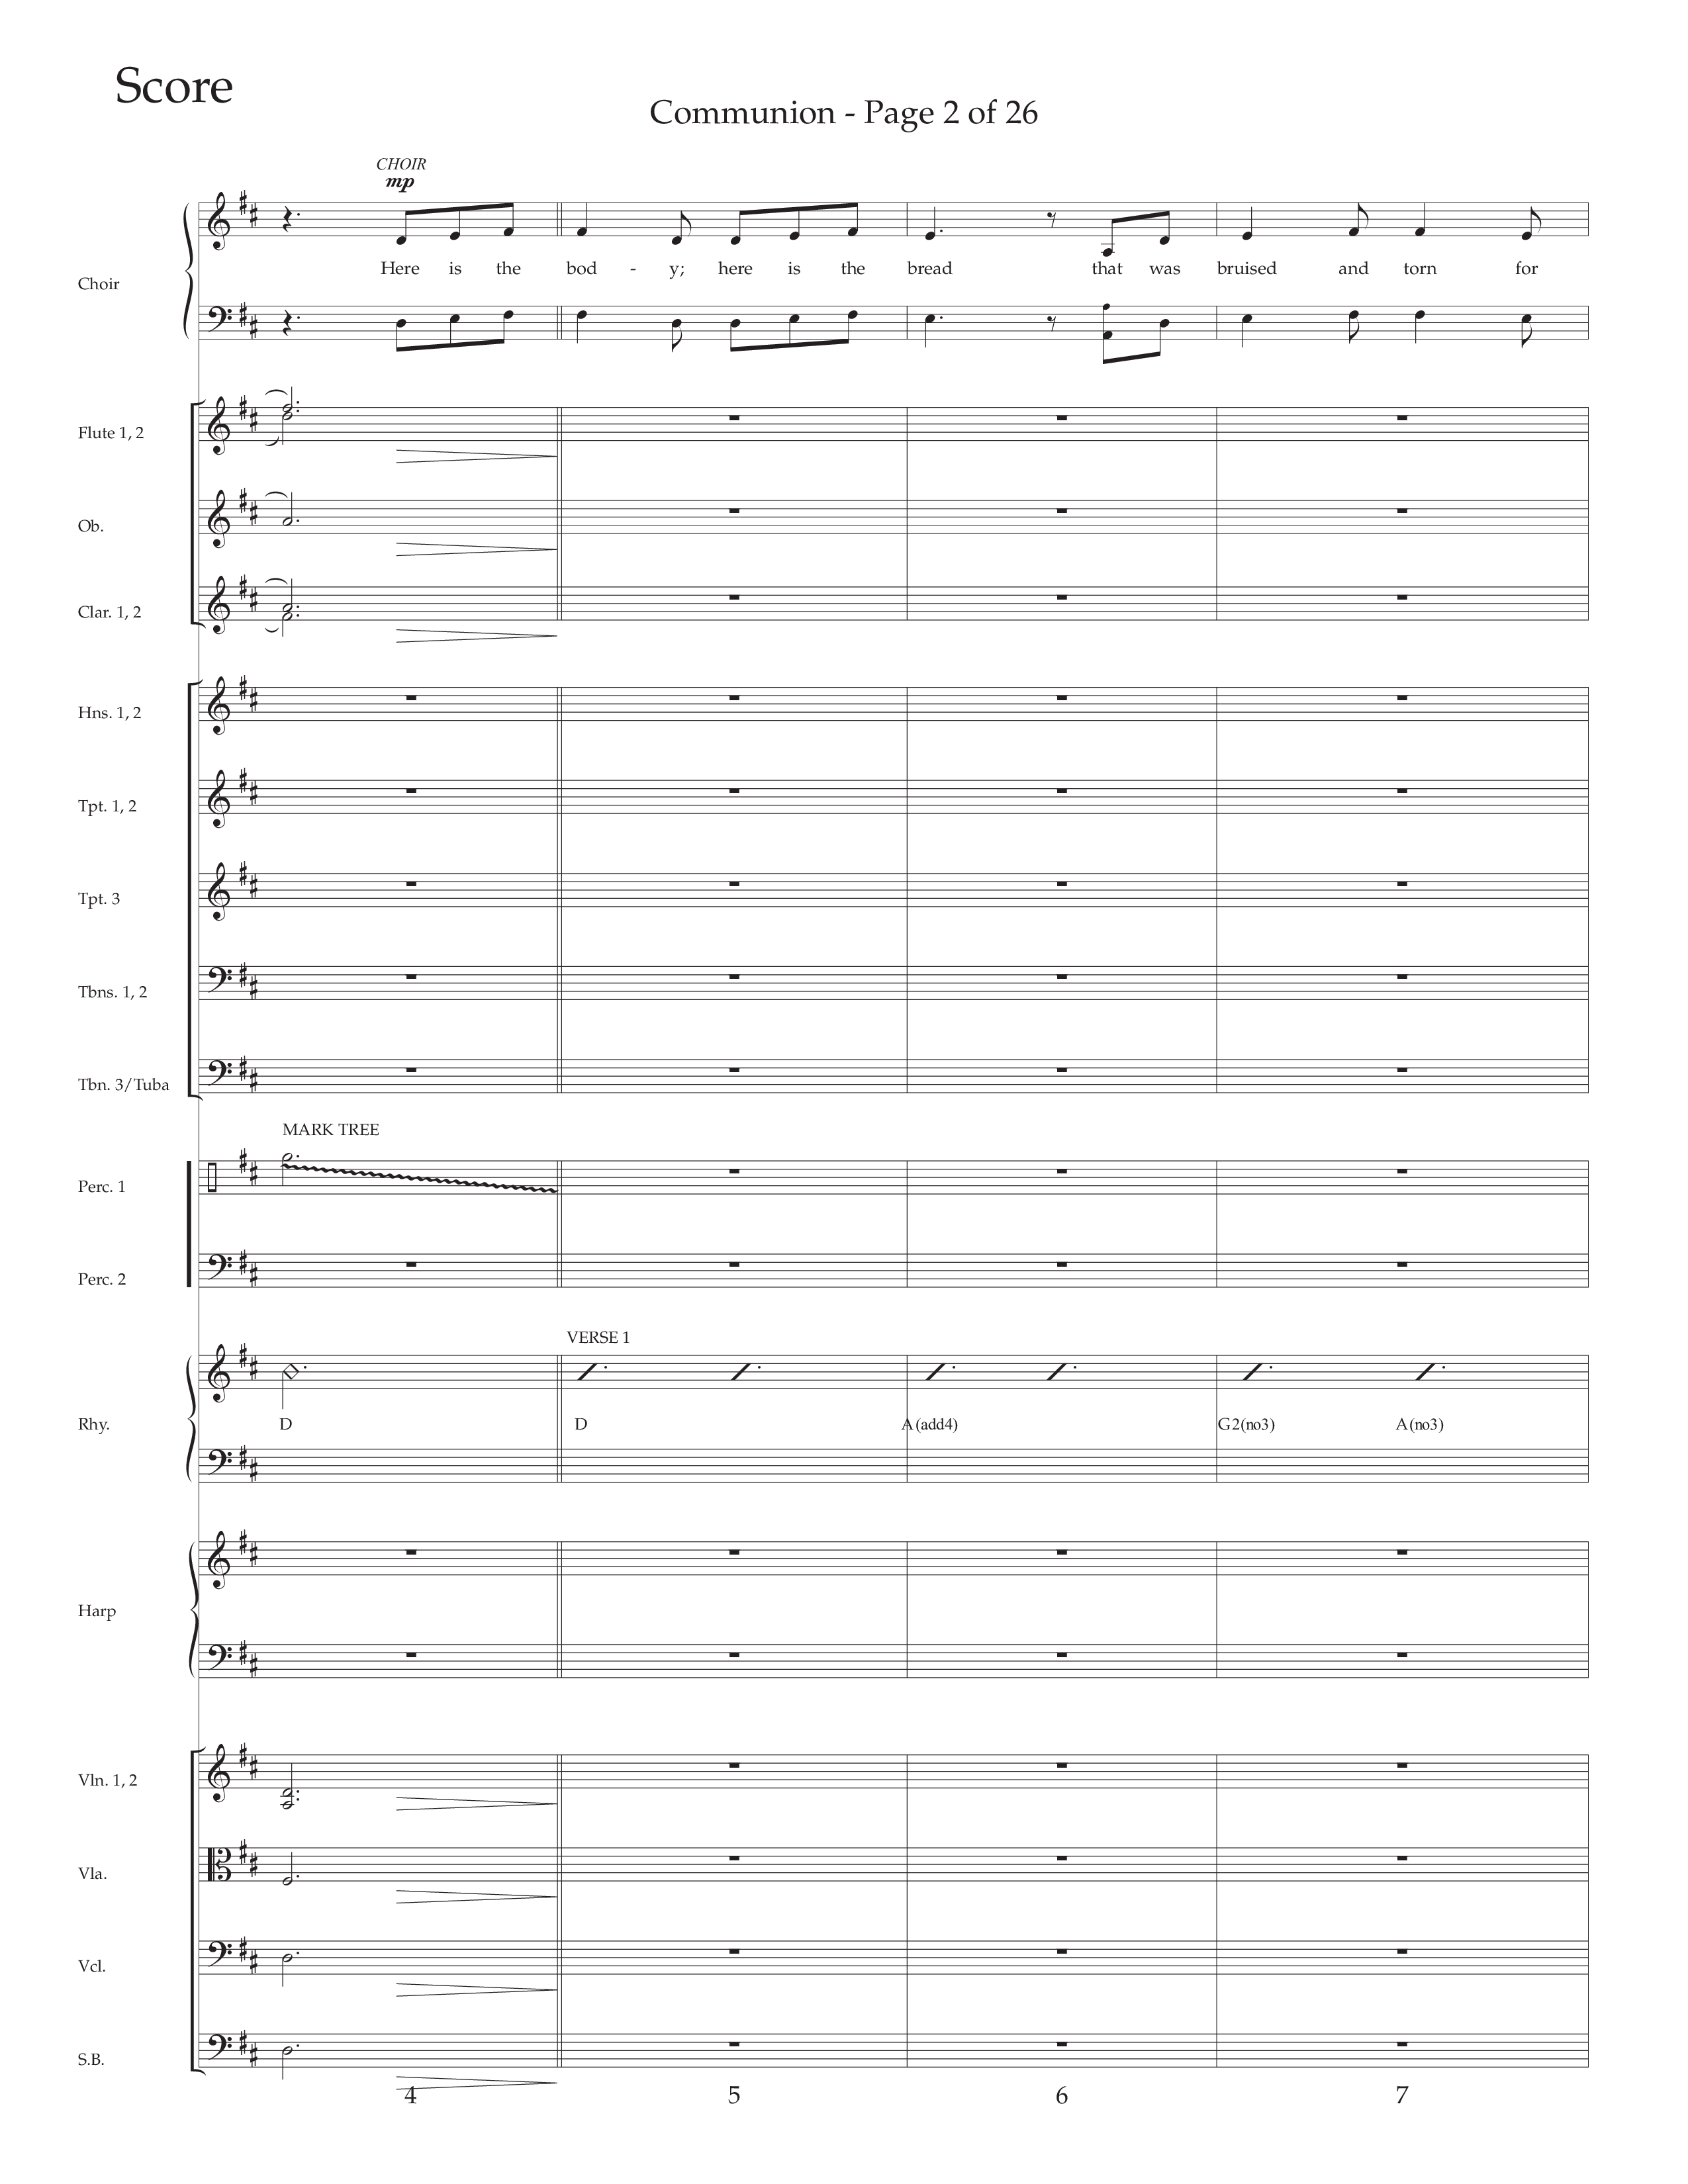 Communion (Choral Anthem SATB) Conductor's Score (Daywind Worship / Arr. Marty Hamby)